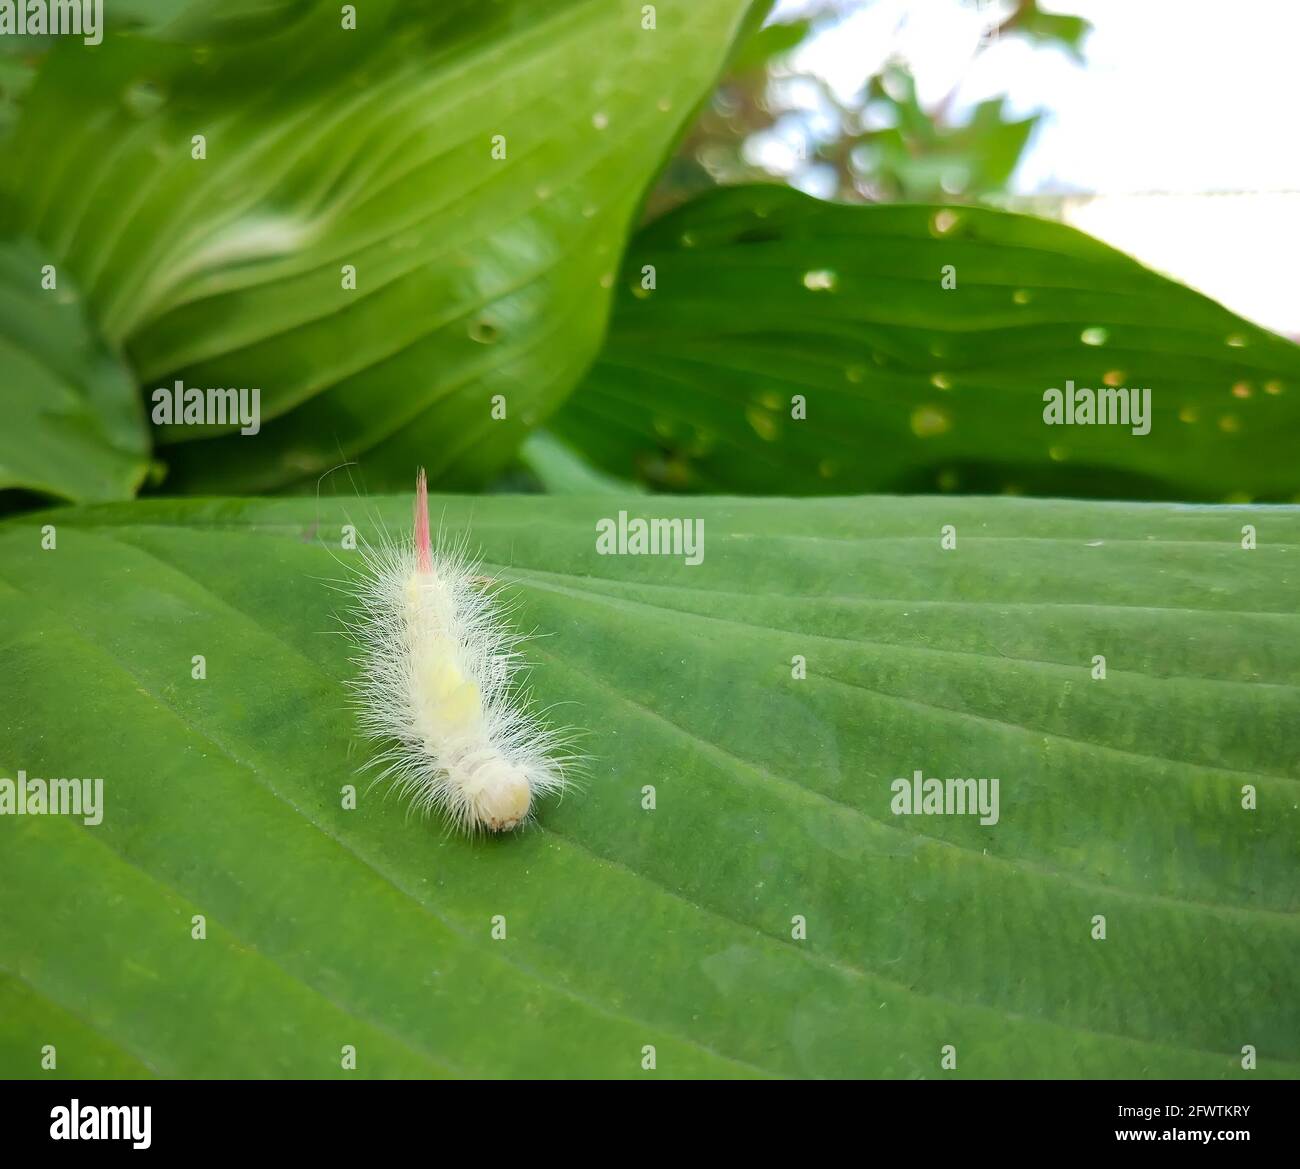 White fluffy caterpillar of a Leucoma salicis or Lymantriinae butterfly on green leaf. Stock Photo